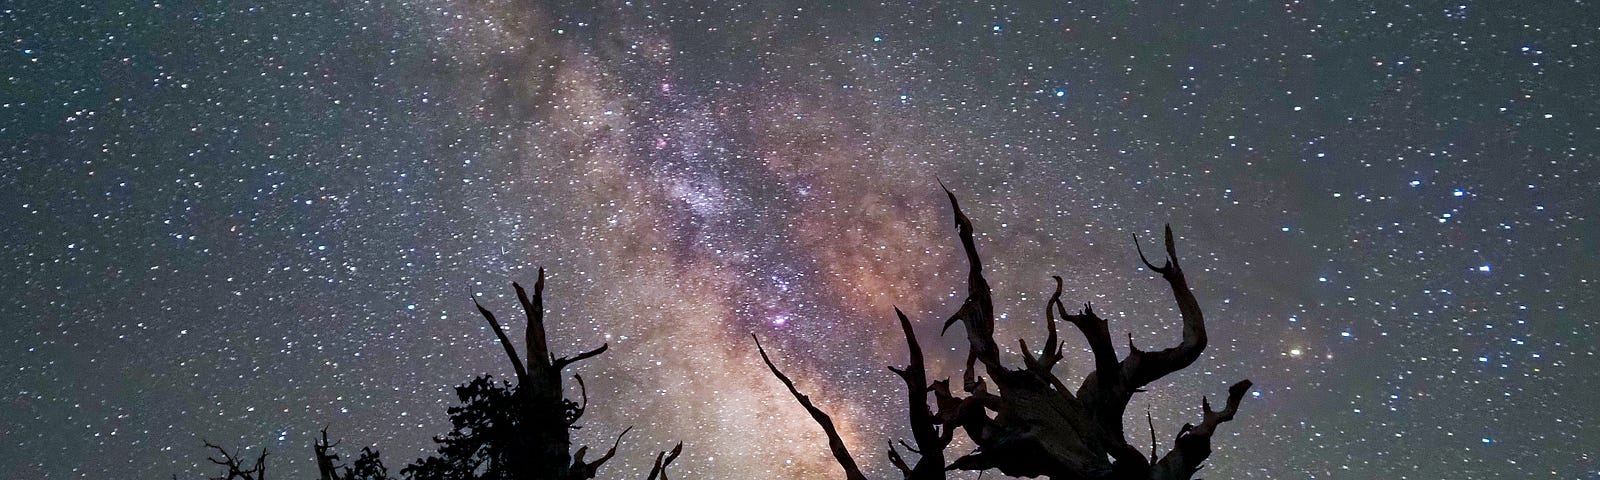 The Sentinels in the Schulman Grove atop the White Mountains of California spindle skyward, appearing to intertwine with the Milky Way. These bristlecone pines were saplings together some 3,500 years ago. The tree on the right died about 500 years ago; the one on the left is still living. (Photo: ©Craig K. Collins)